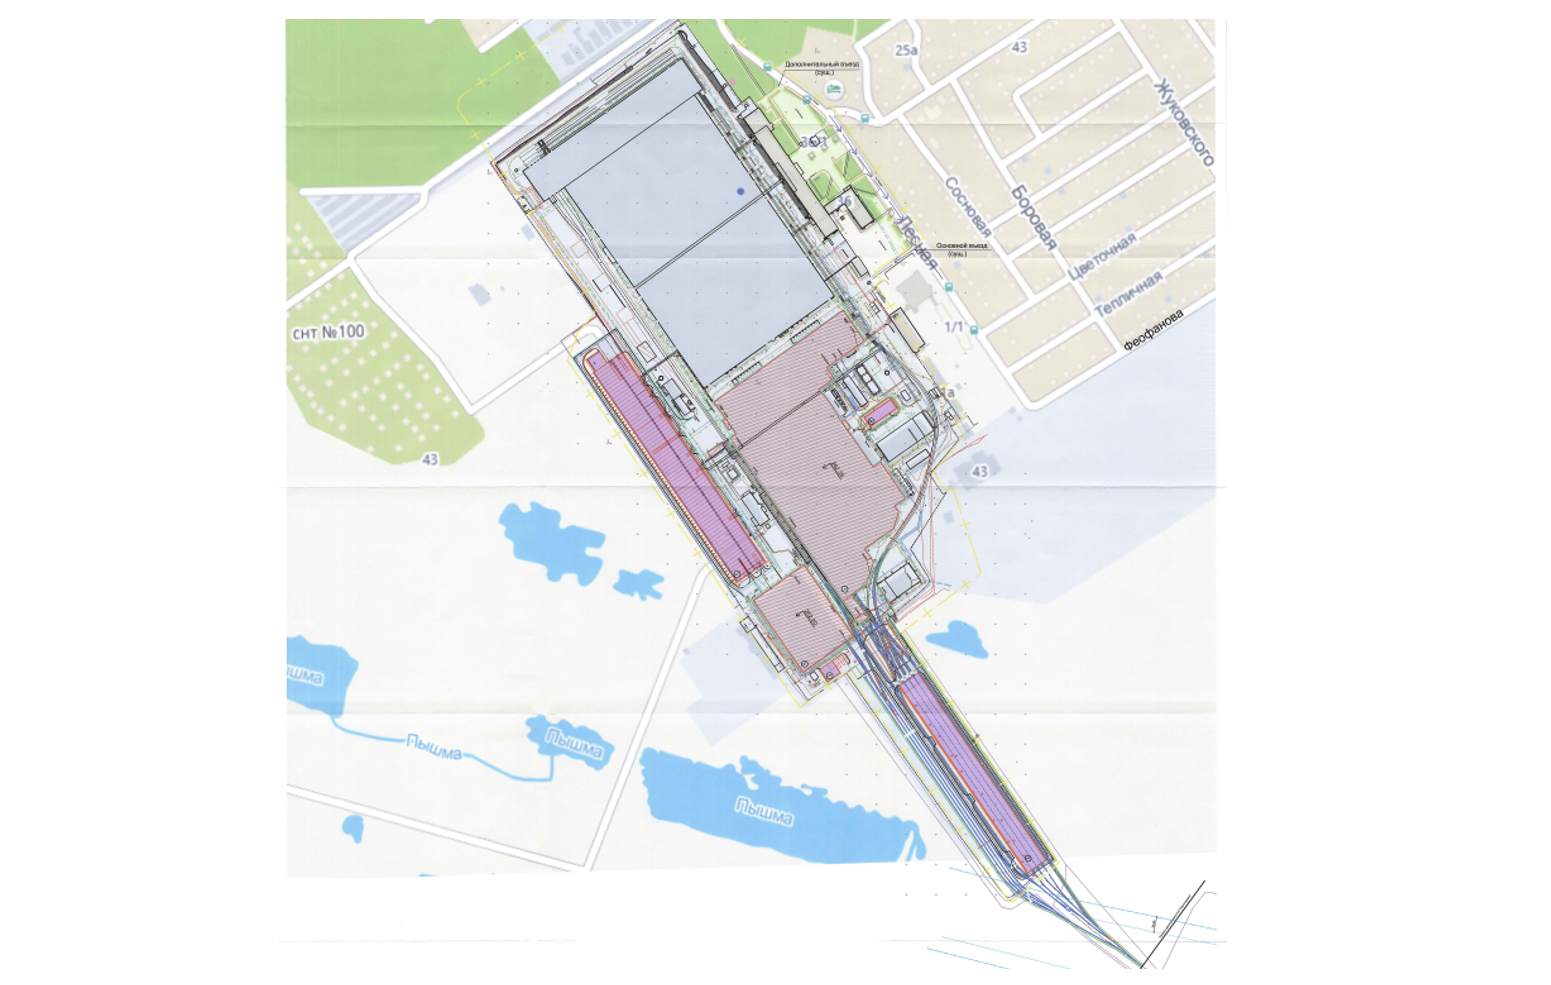 Scheme of the Ural locomotives production site development plan. New designed facilities are coloured purple, buildings to be reconstructed are red with strokes 